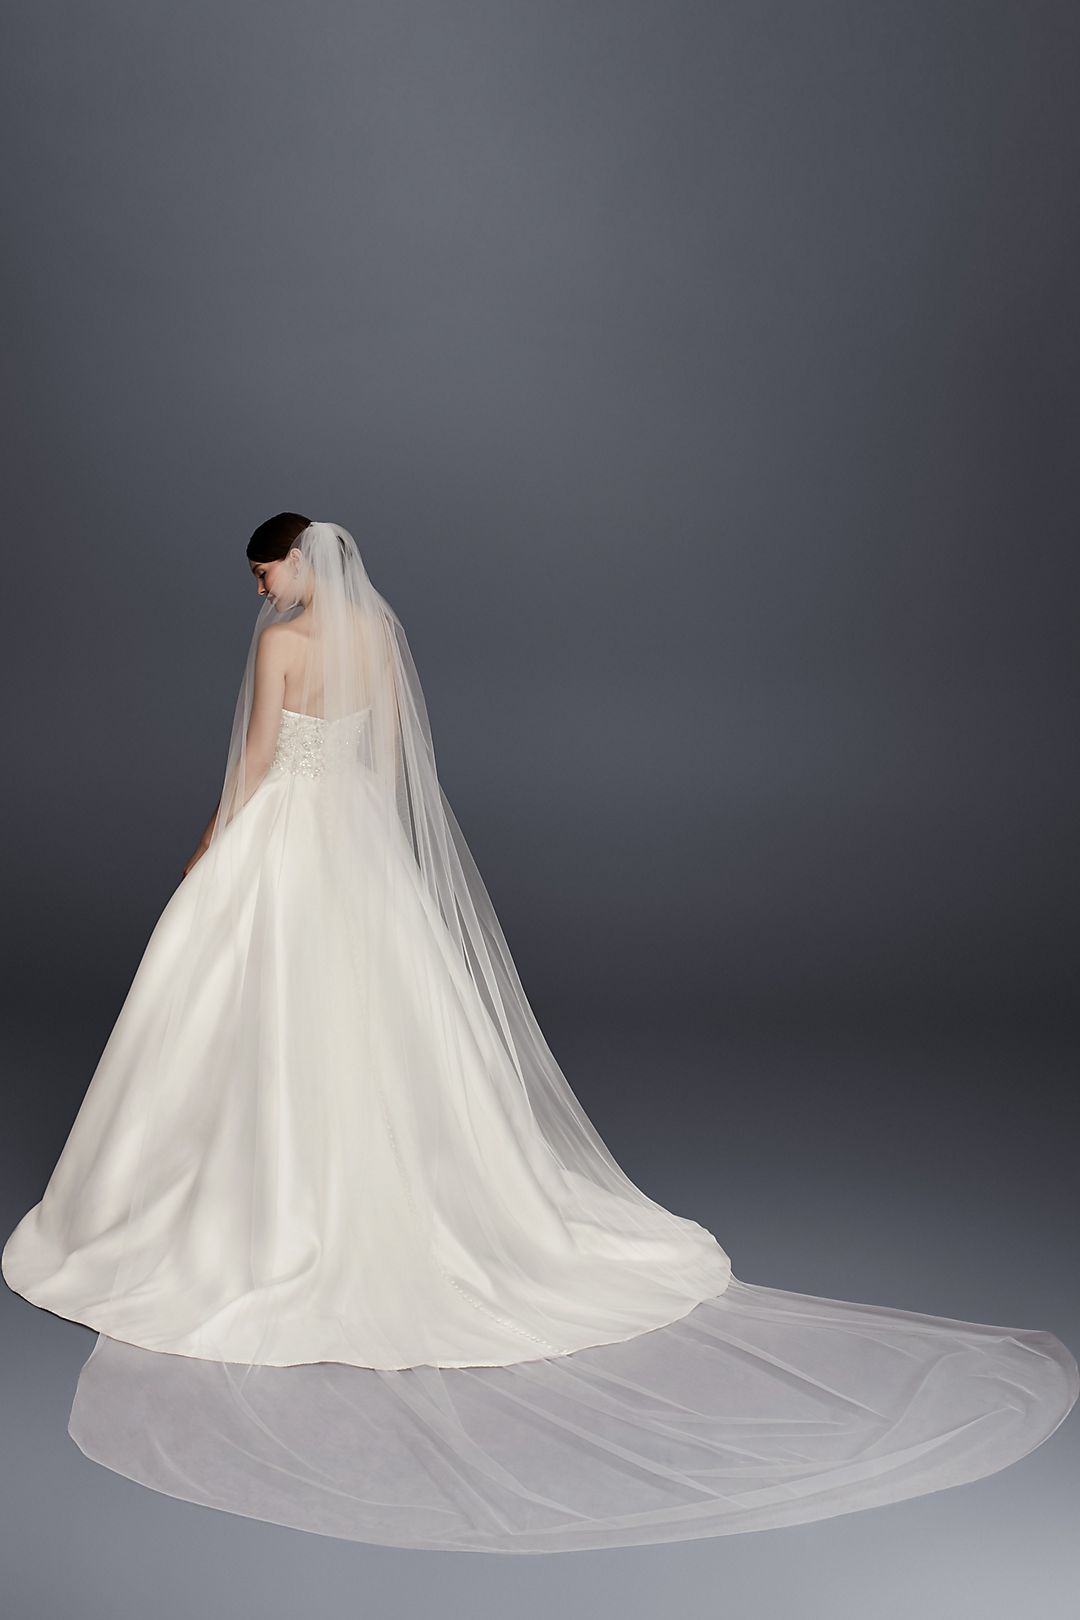 Single-Tier Raw Edge 144-Inch Cathedral Veil  Image 2